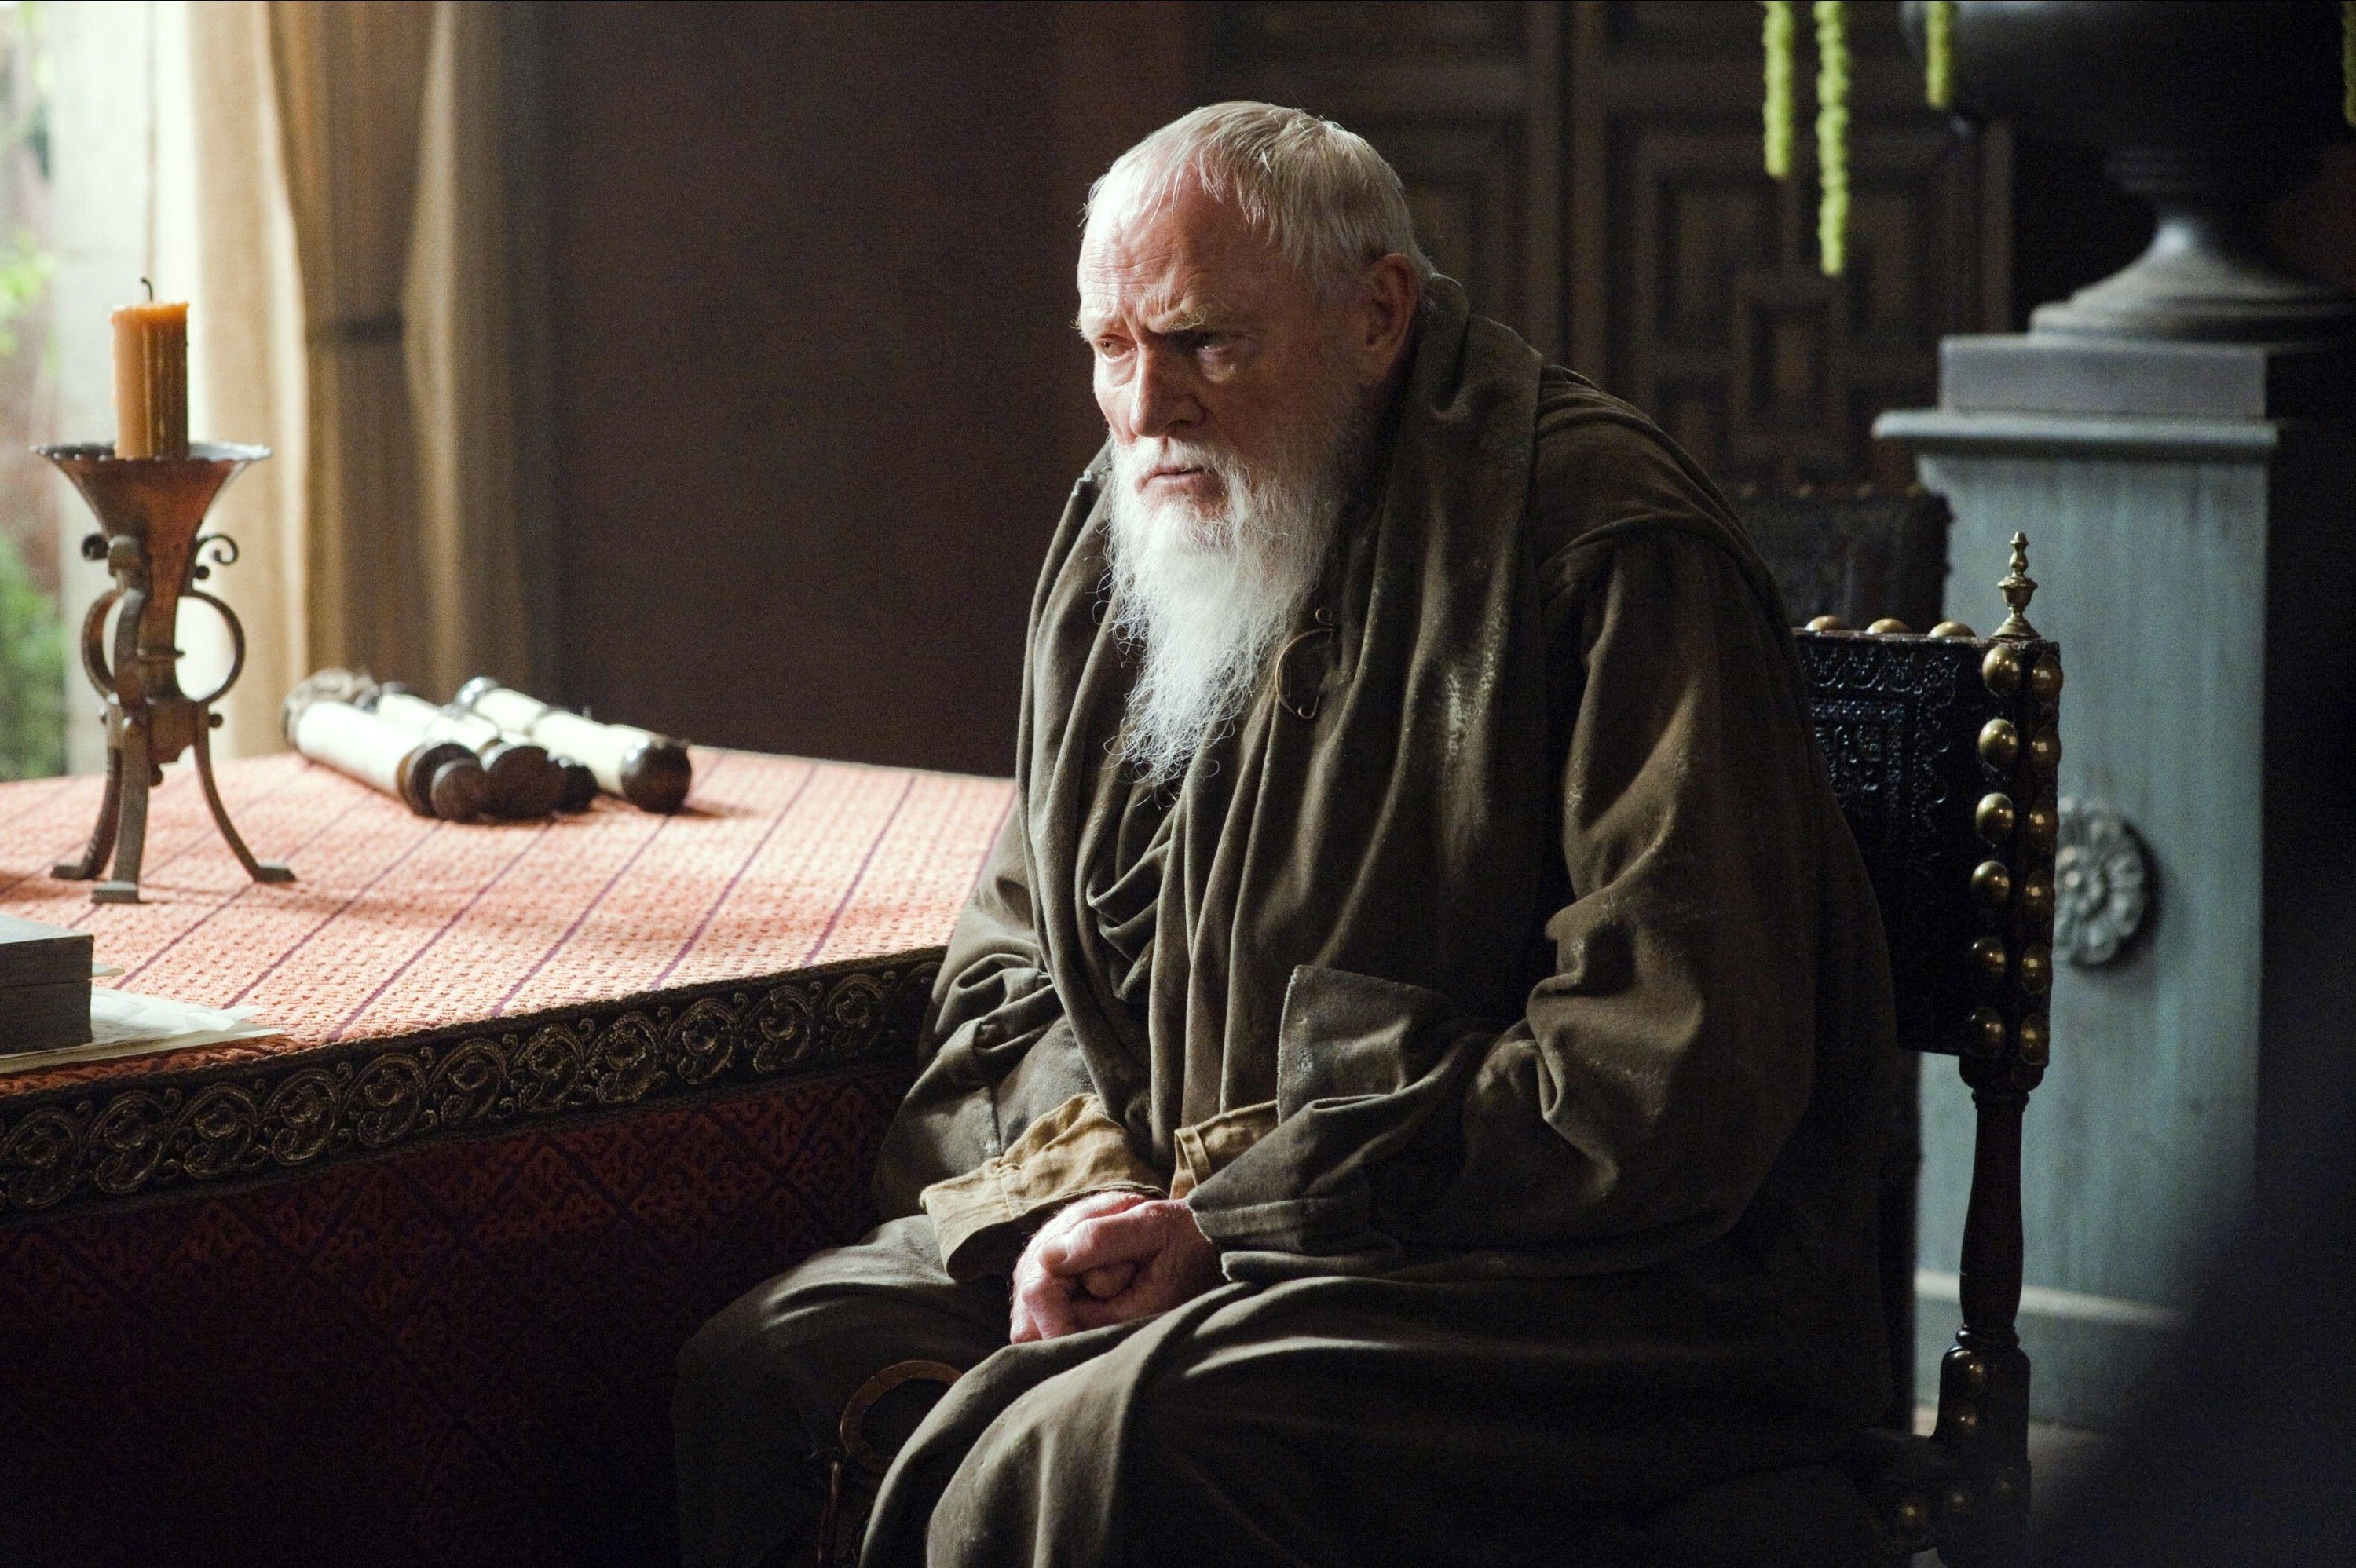 An old, bearded man in long robes sits at a table near some scrolls.